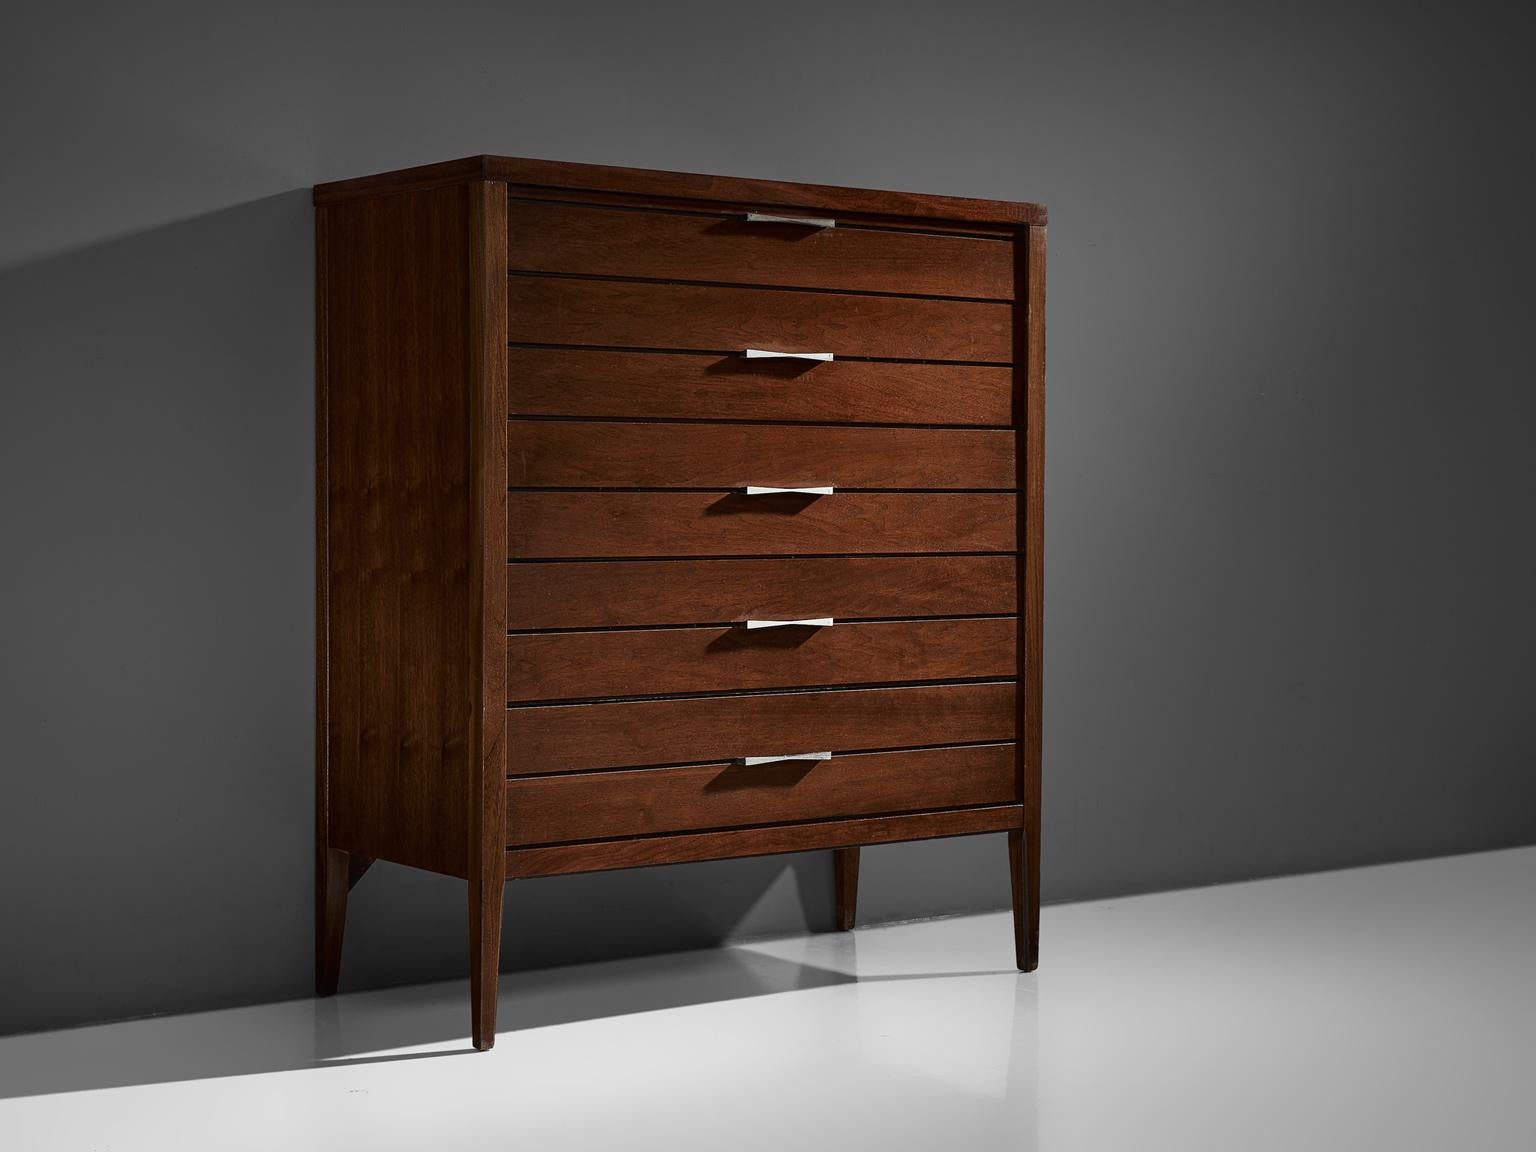 Chest of drawers, walnut, rosewood and metal, United States, 1950s.

This chest of drawers features strong traits of the functional and modest furniture line of Paul McCobb. The piece features five butterfly handles and beautiful matching butterfly